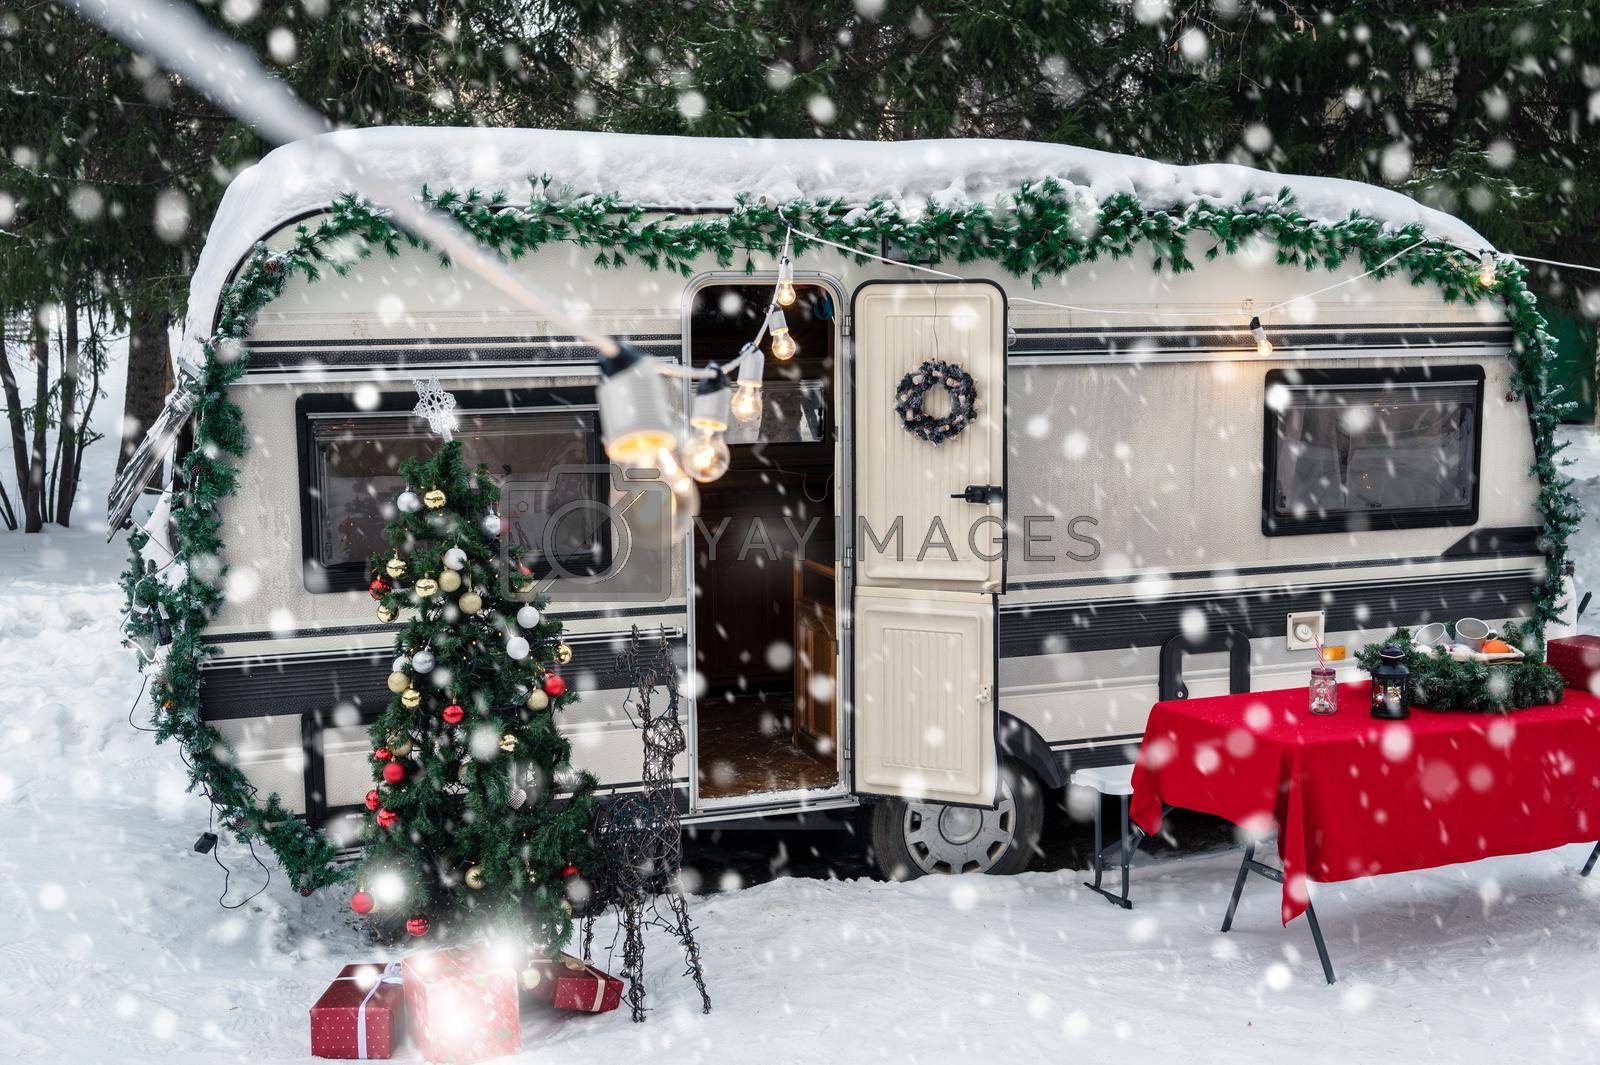 Campervan motorhome in winter camping decorated for Xmas or Happy New Year holiday